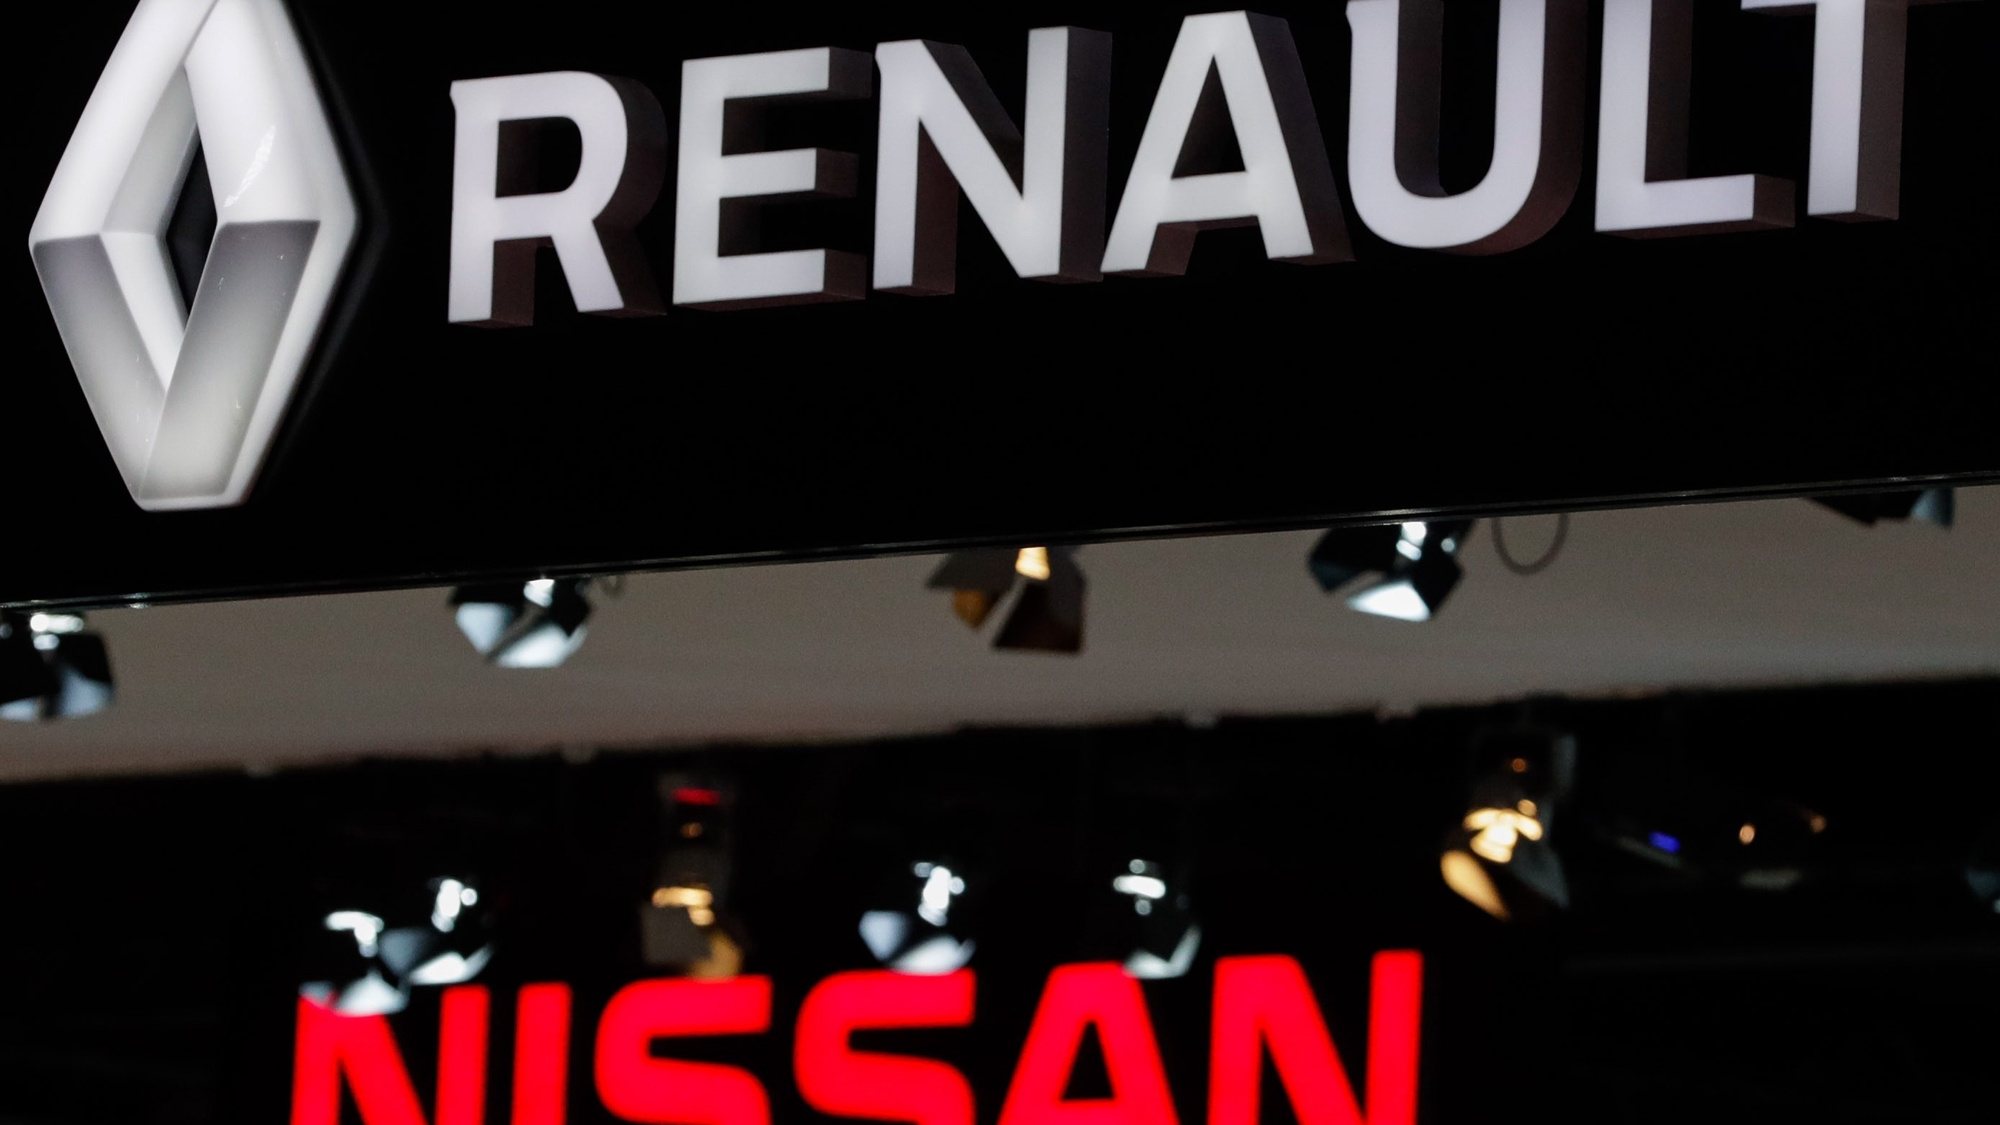 epa10439559 (FILE) - A view of Renault and Nissan logos during the inauguration of the Brussels Motor Show in Brussels, Belgium, 09 January 2020 (reissued 30 January 2023). After months of negotiations with Renault Group, Nissan Motor Co., Ltd announced on 30 January 2023 that the French carmaker accepted to lower its stake in Nissan from 43 percent to 15 percent, the same percentage Nissan holds in Renault.  EPA/STEPHANIE LECOCQ